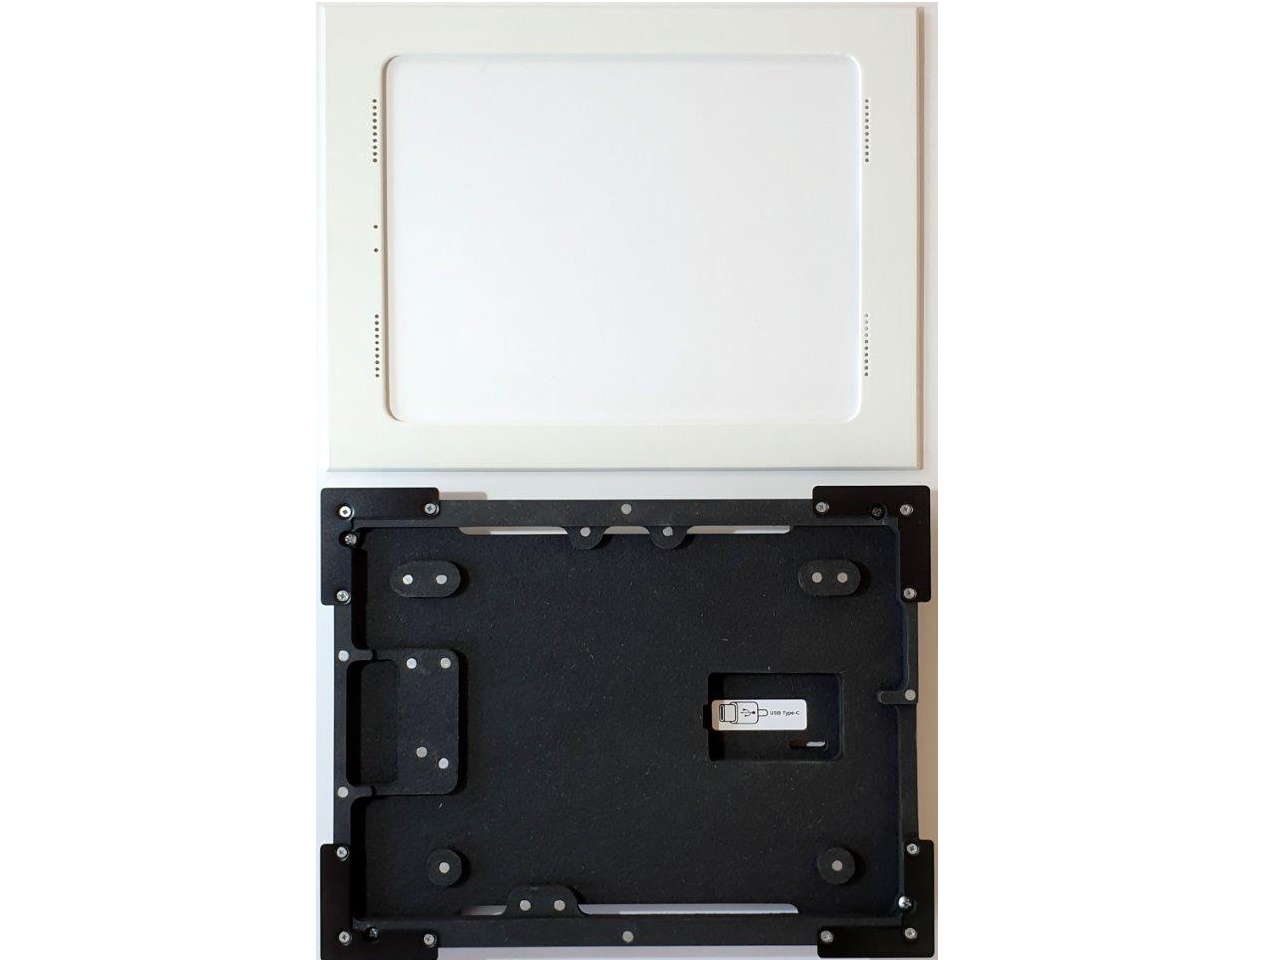 002-1-858-WH Retrofit Mount for iPad Pro 12.9 inch 5th Gen (White) by Wall-Smart